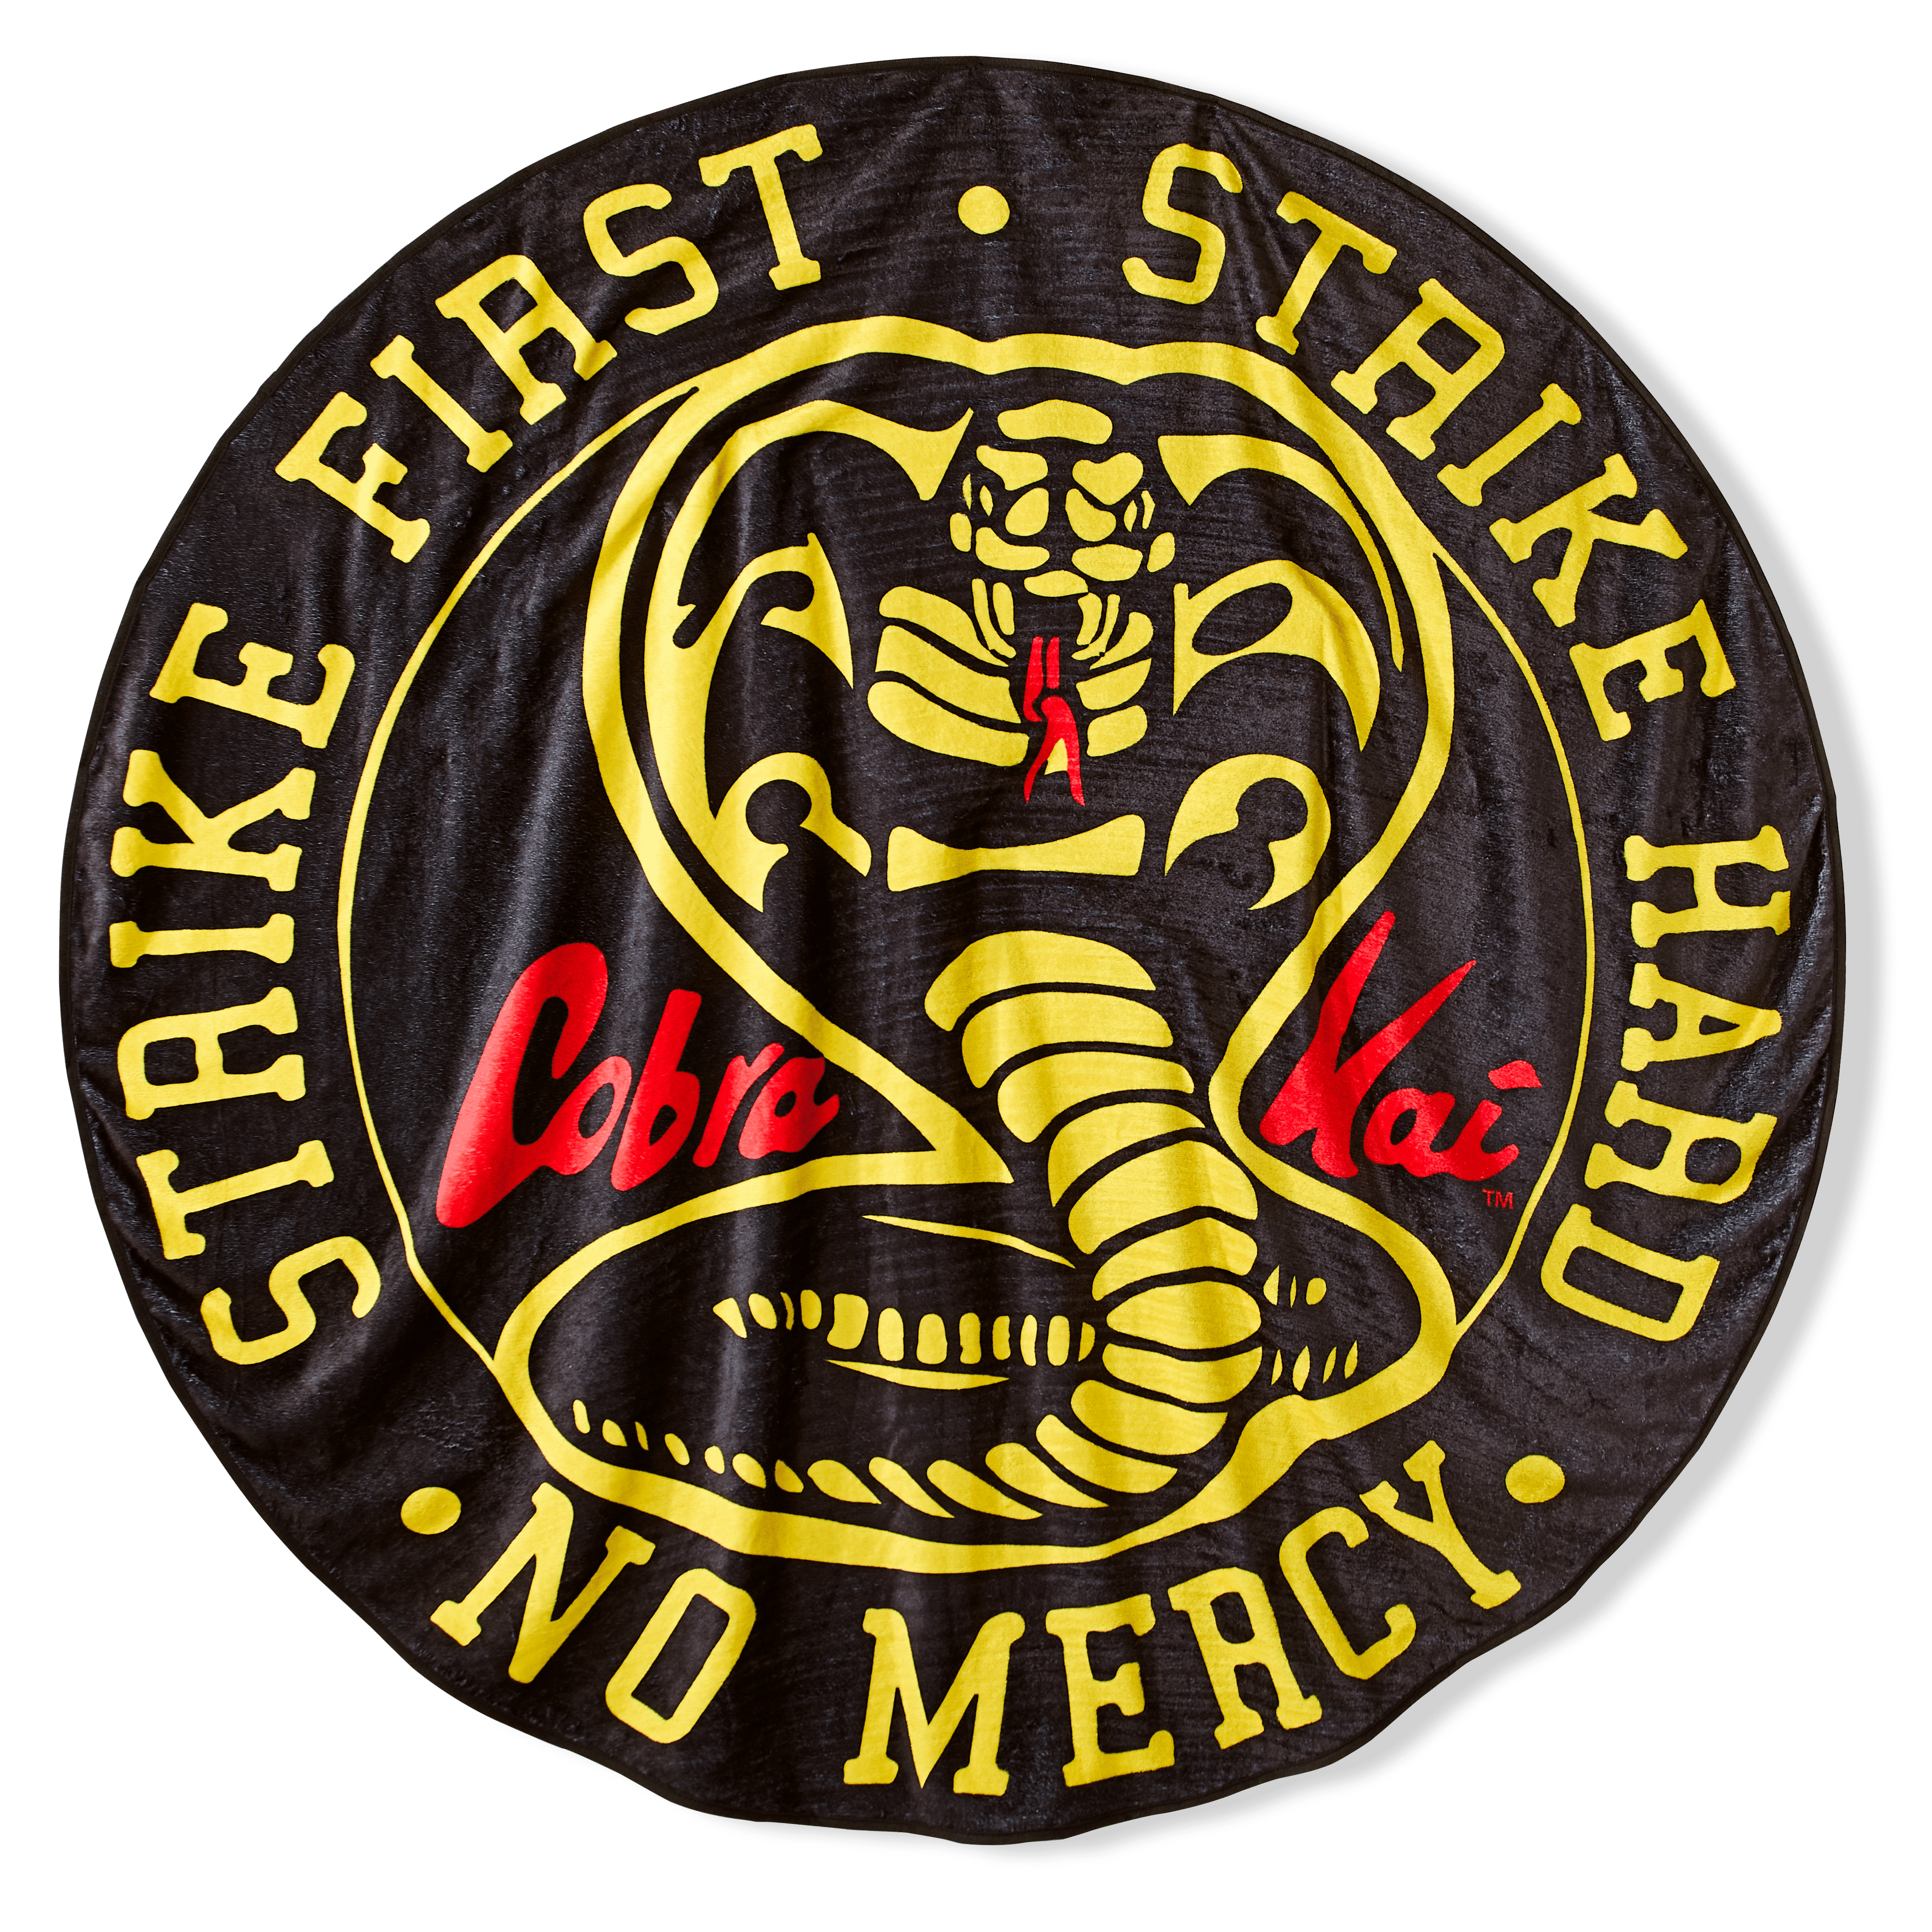 Cobra Kai sweeps the Loot Crate leg with new collection 2